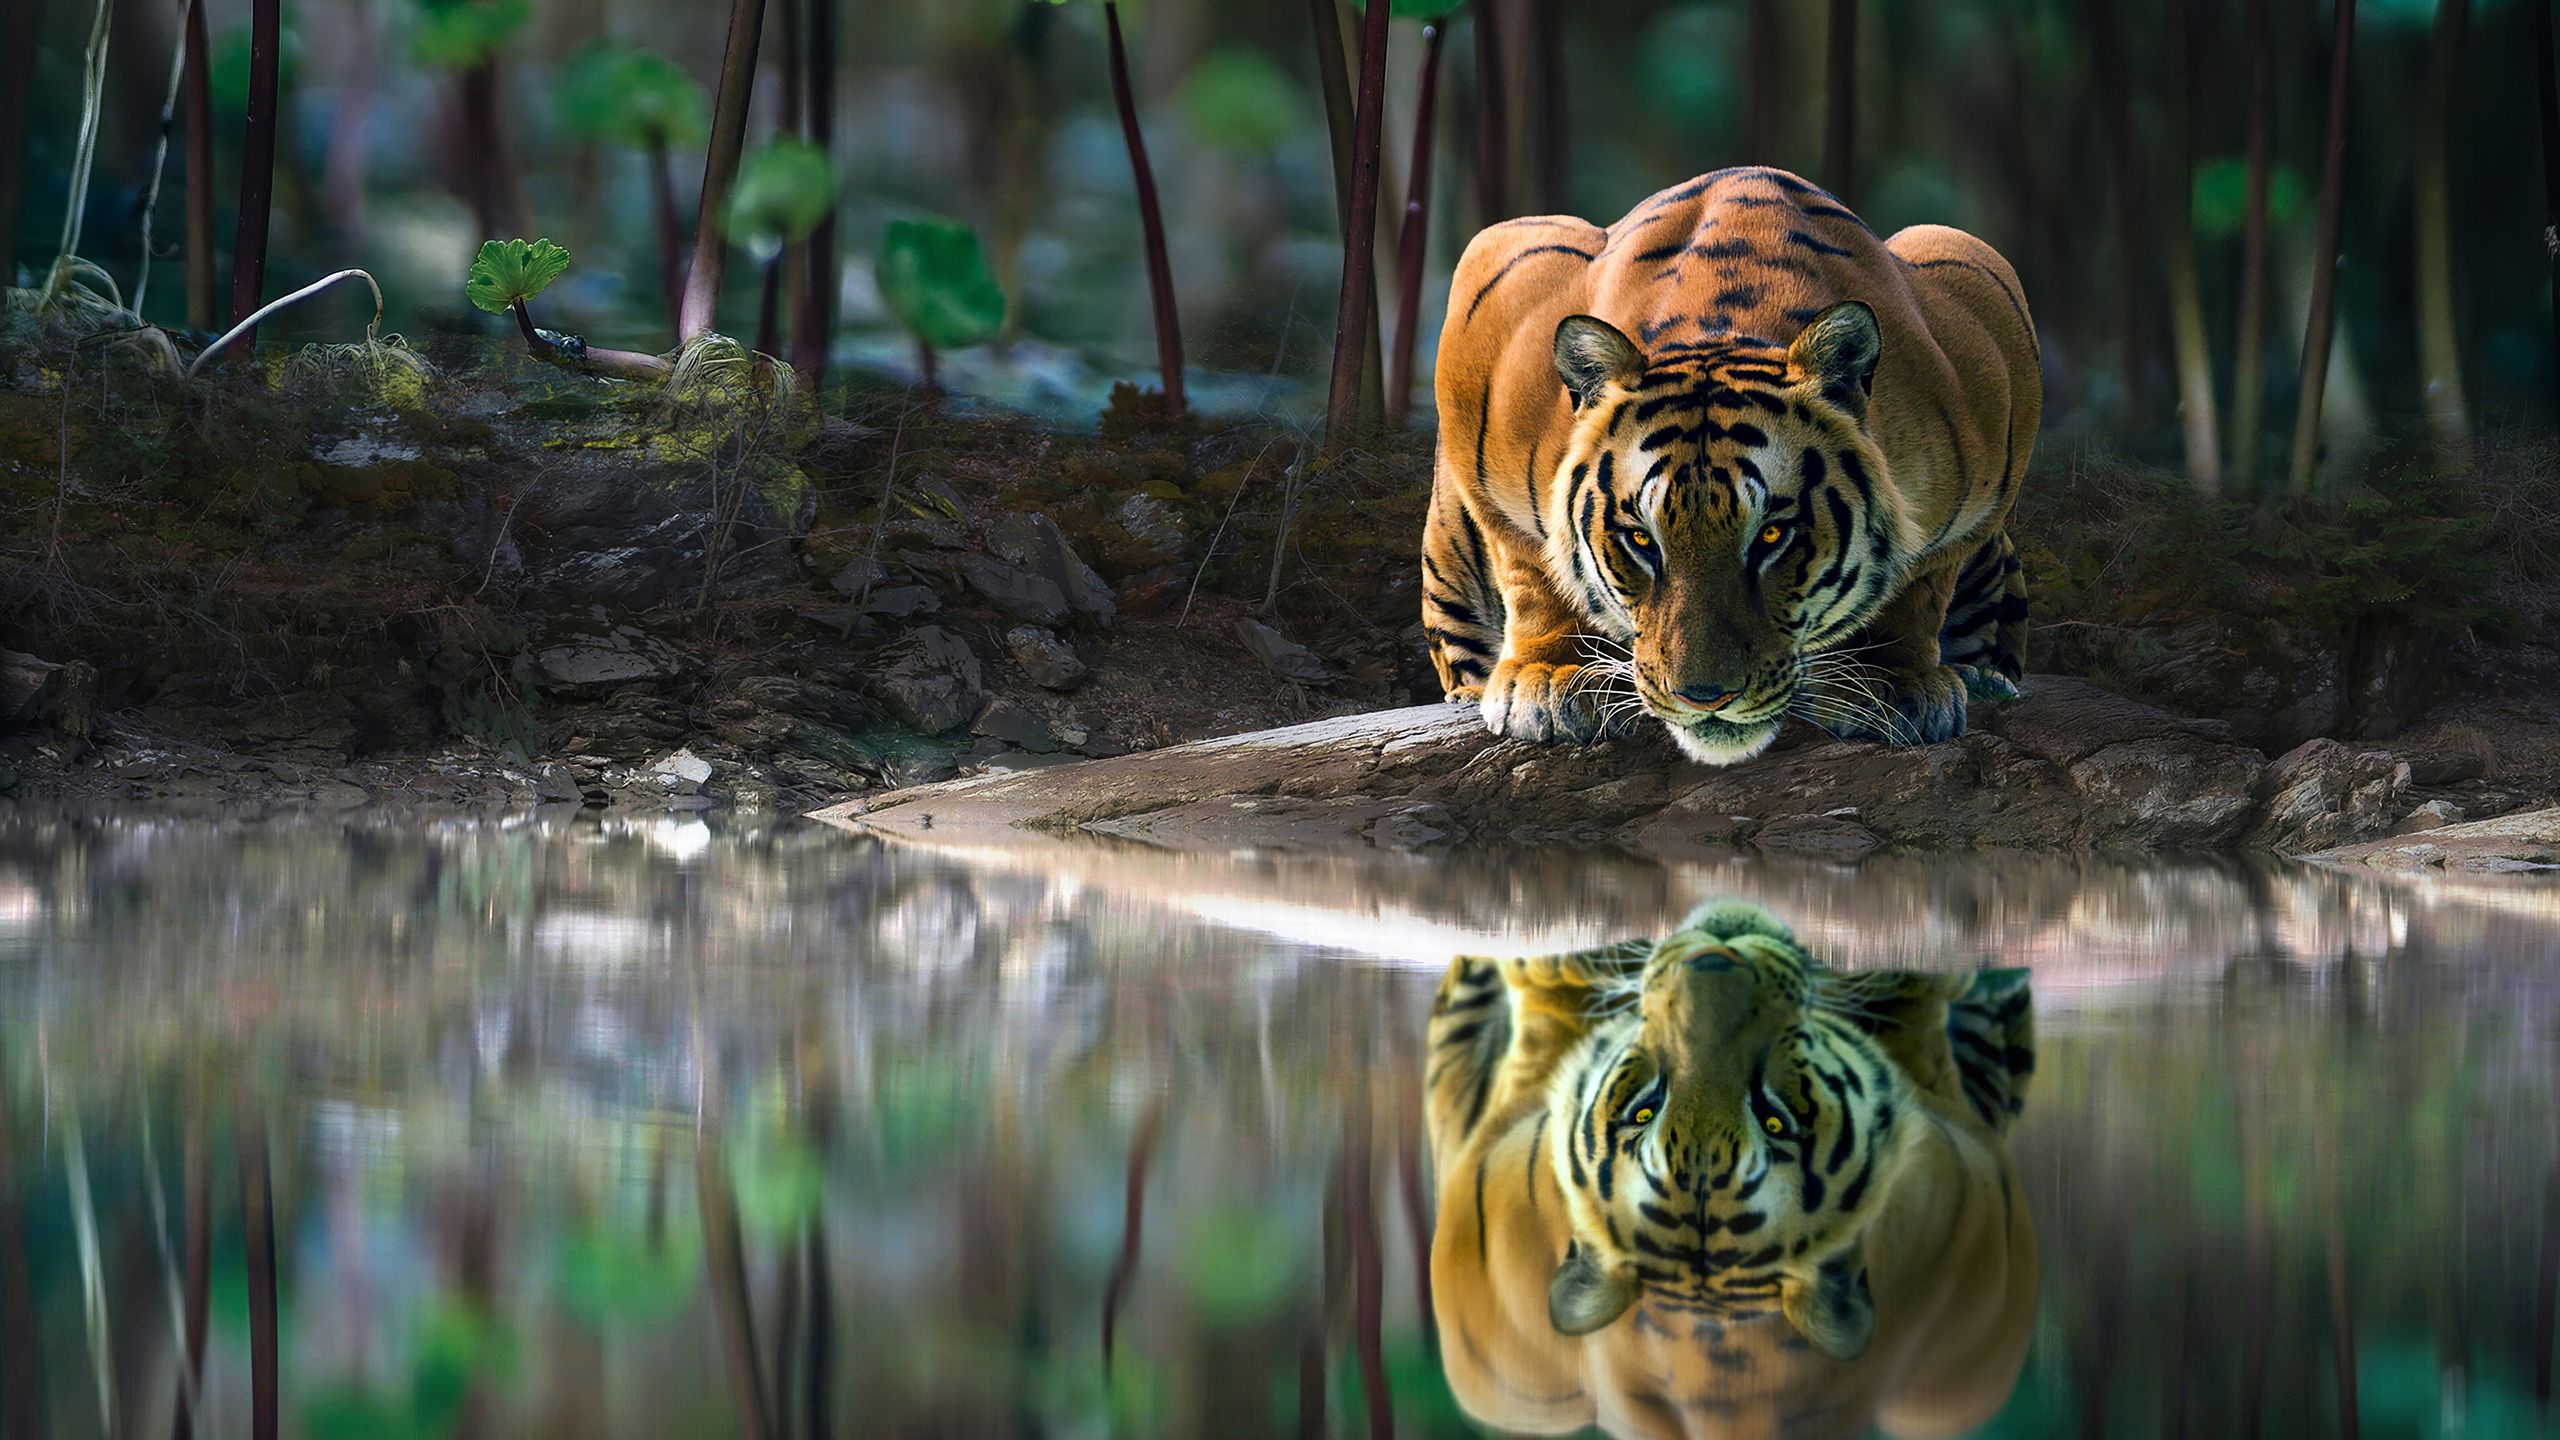 Tiger Glowing Eyes Drinking Water 4k 1440P Resolution HD 4k Wallpaper, Image, Background, Photo and Picture